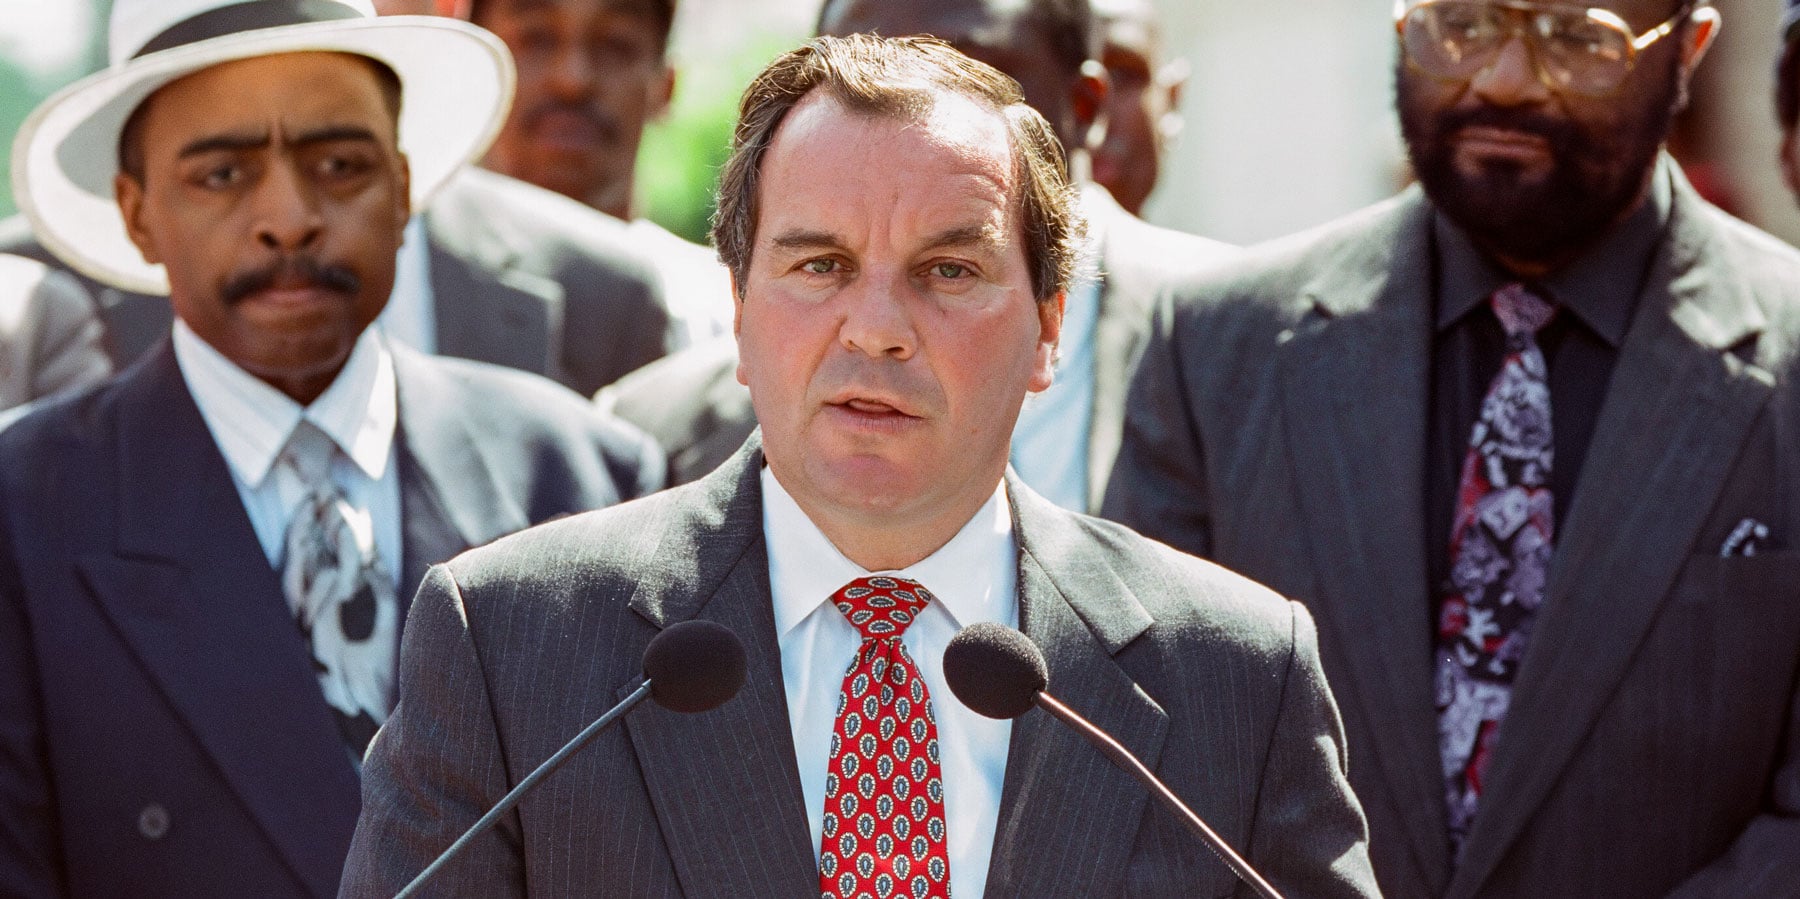 Richard M. Daley speaking at a press conference in 1992